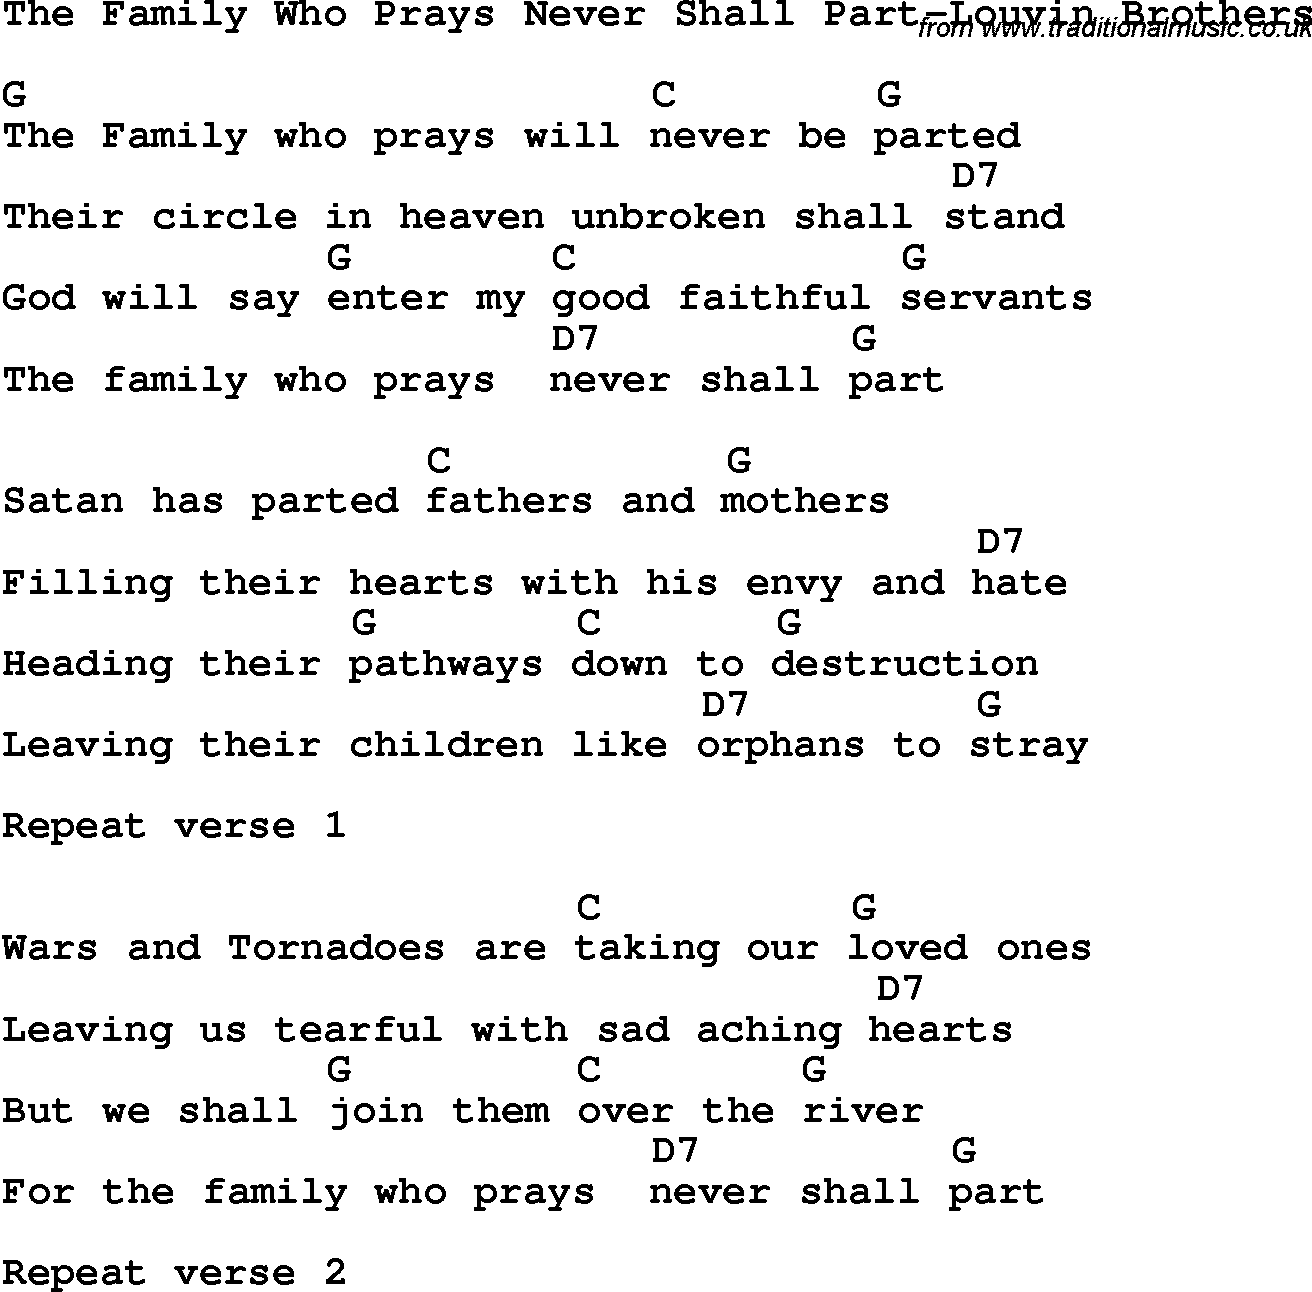 Country, Southern and Bluegrass Gospel Song The Family Who Prays Never Shall Part-Louvin Brothers lyrics and chords